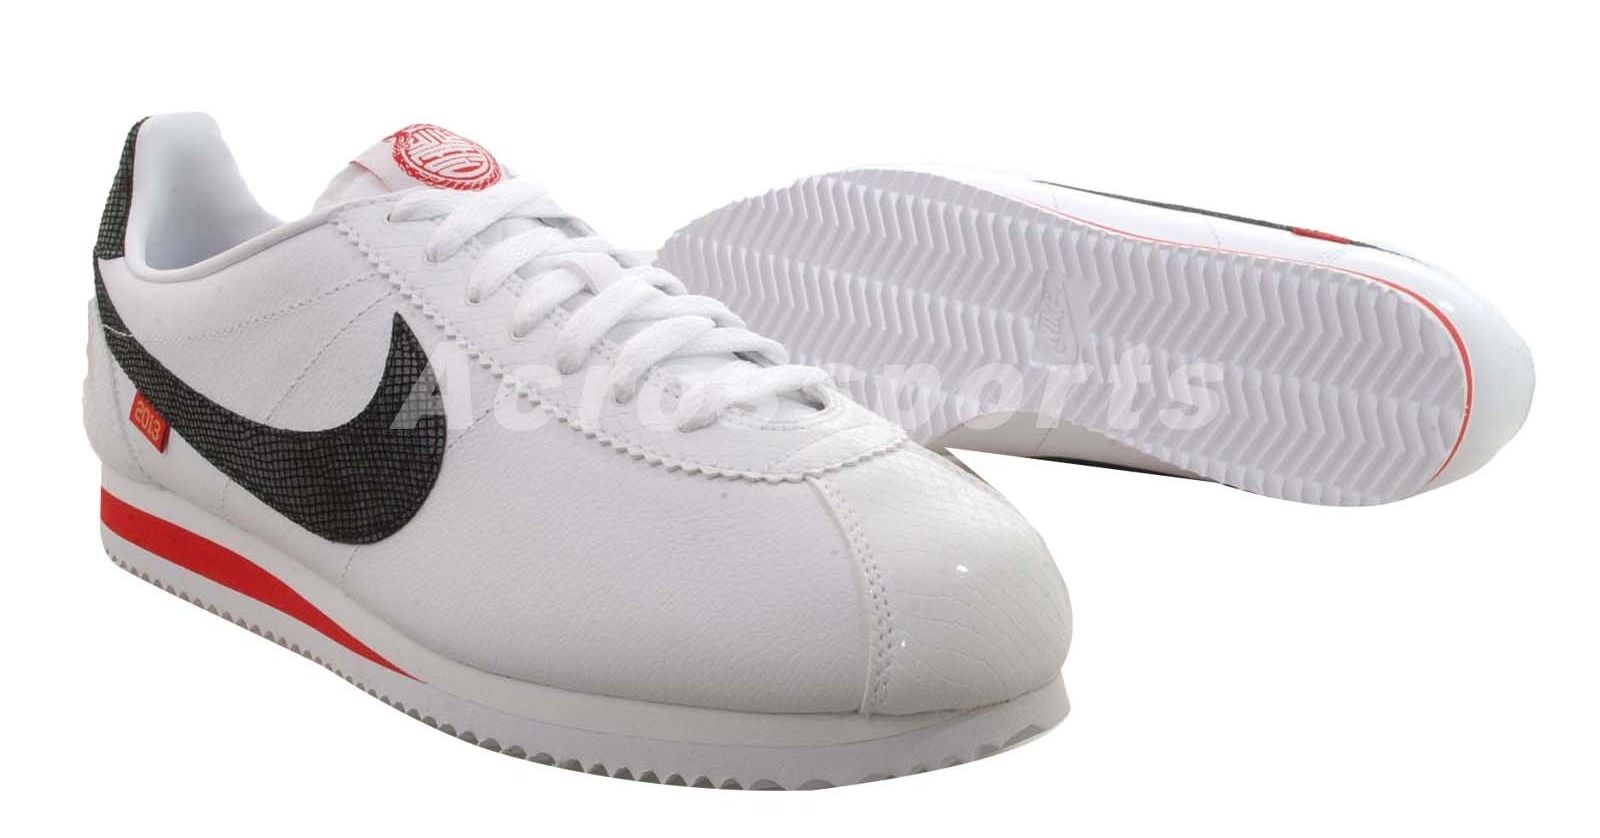 Nike Cortez Year Of The Snake 03